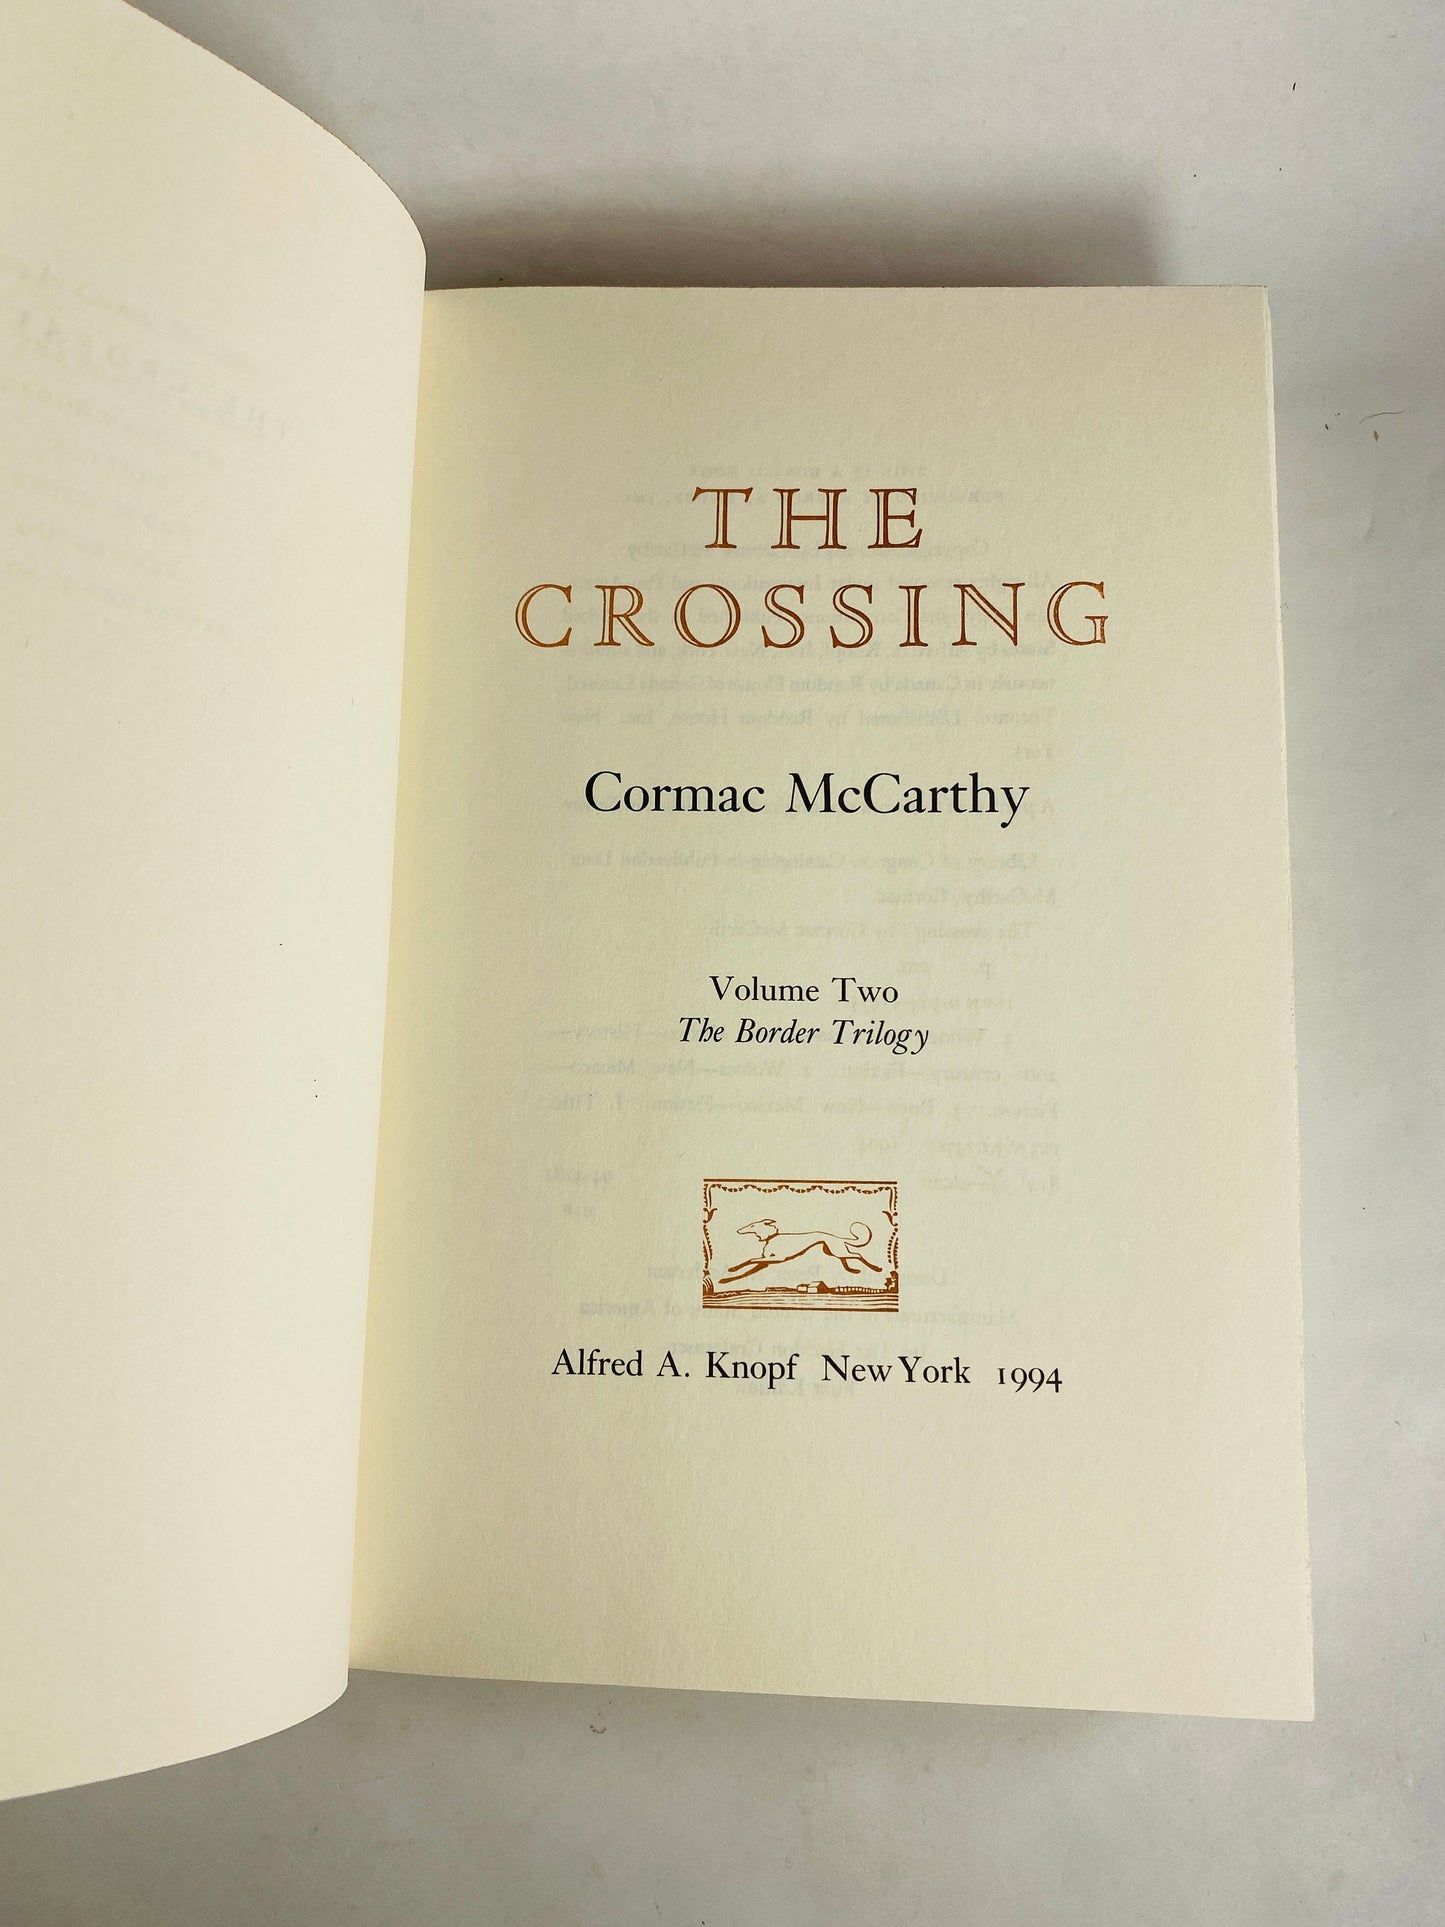 The Crossing by Cormac McCarthy Vintage book volume two of the Border Trilogy. Author of All the Pretty Horses and No Country For Old Men